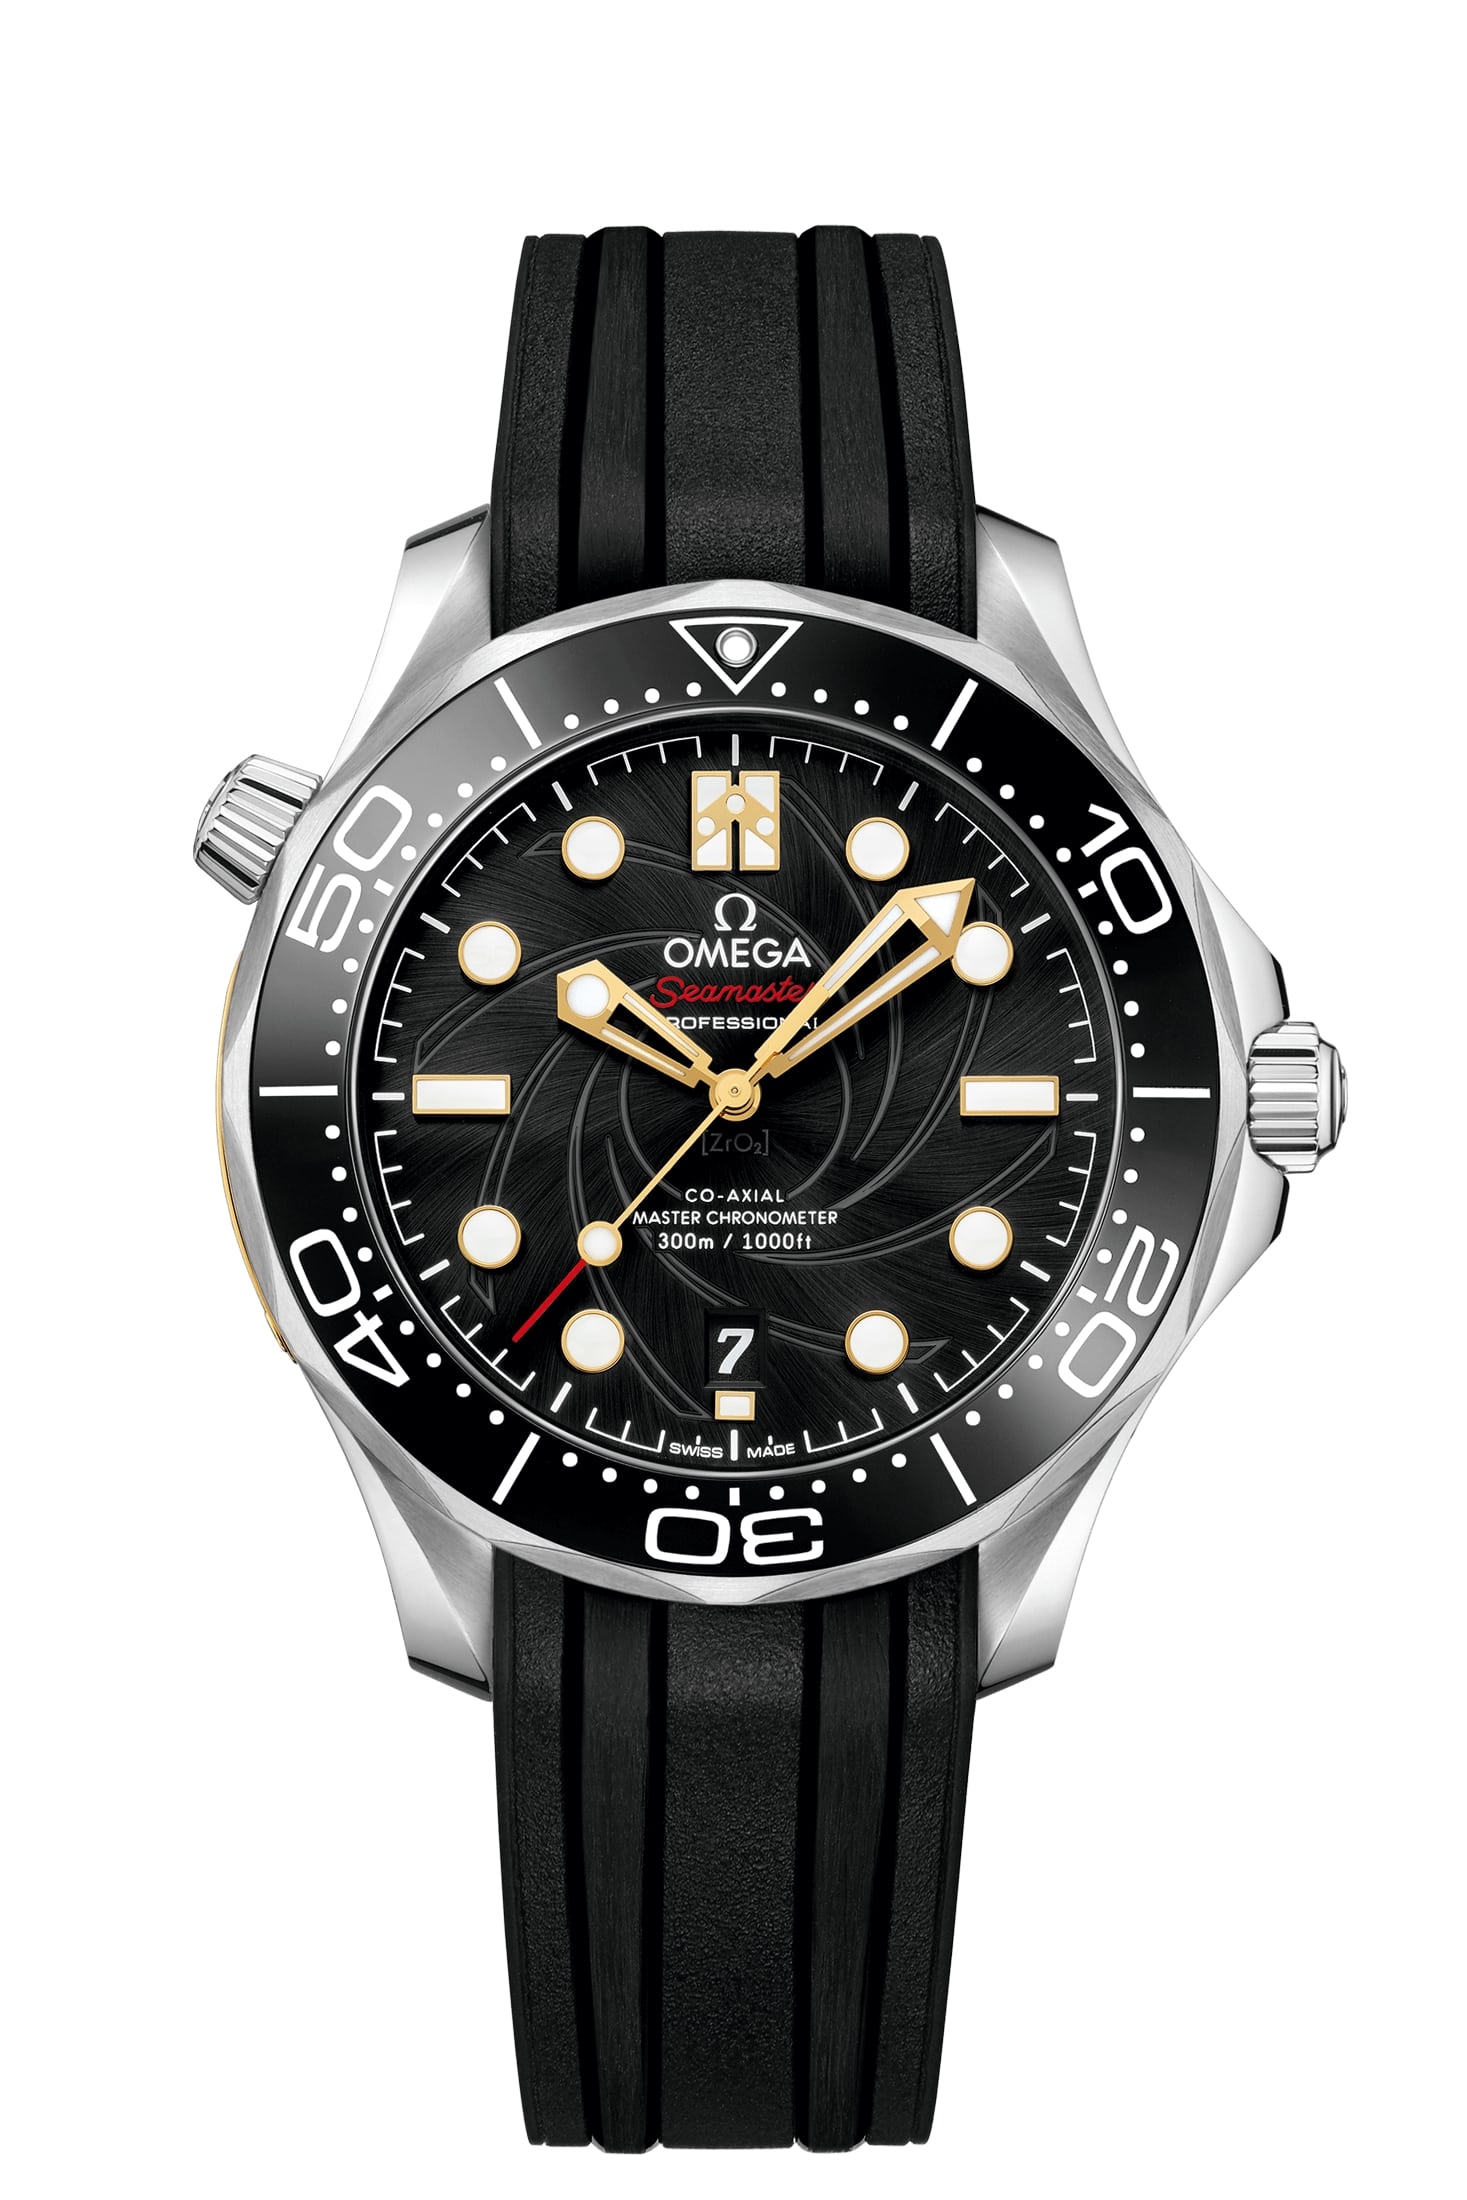 omega-seamaster-diver-300m-omega-co-axial-master-chronometer-42-mm-21022422001004-1-product-zoom.jpg